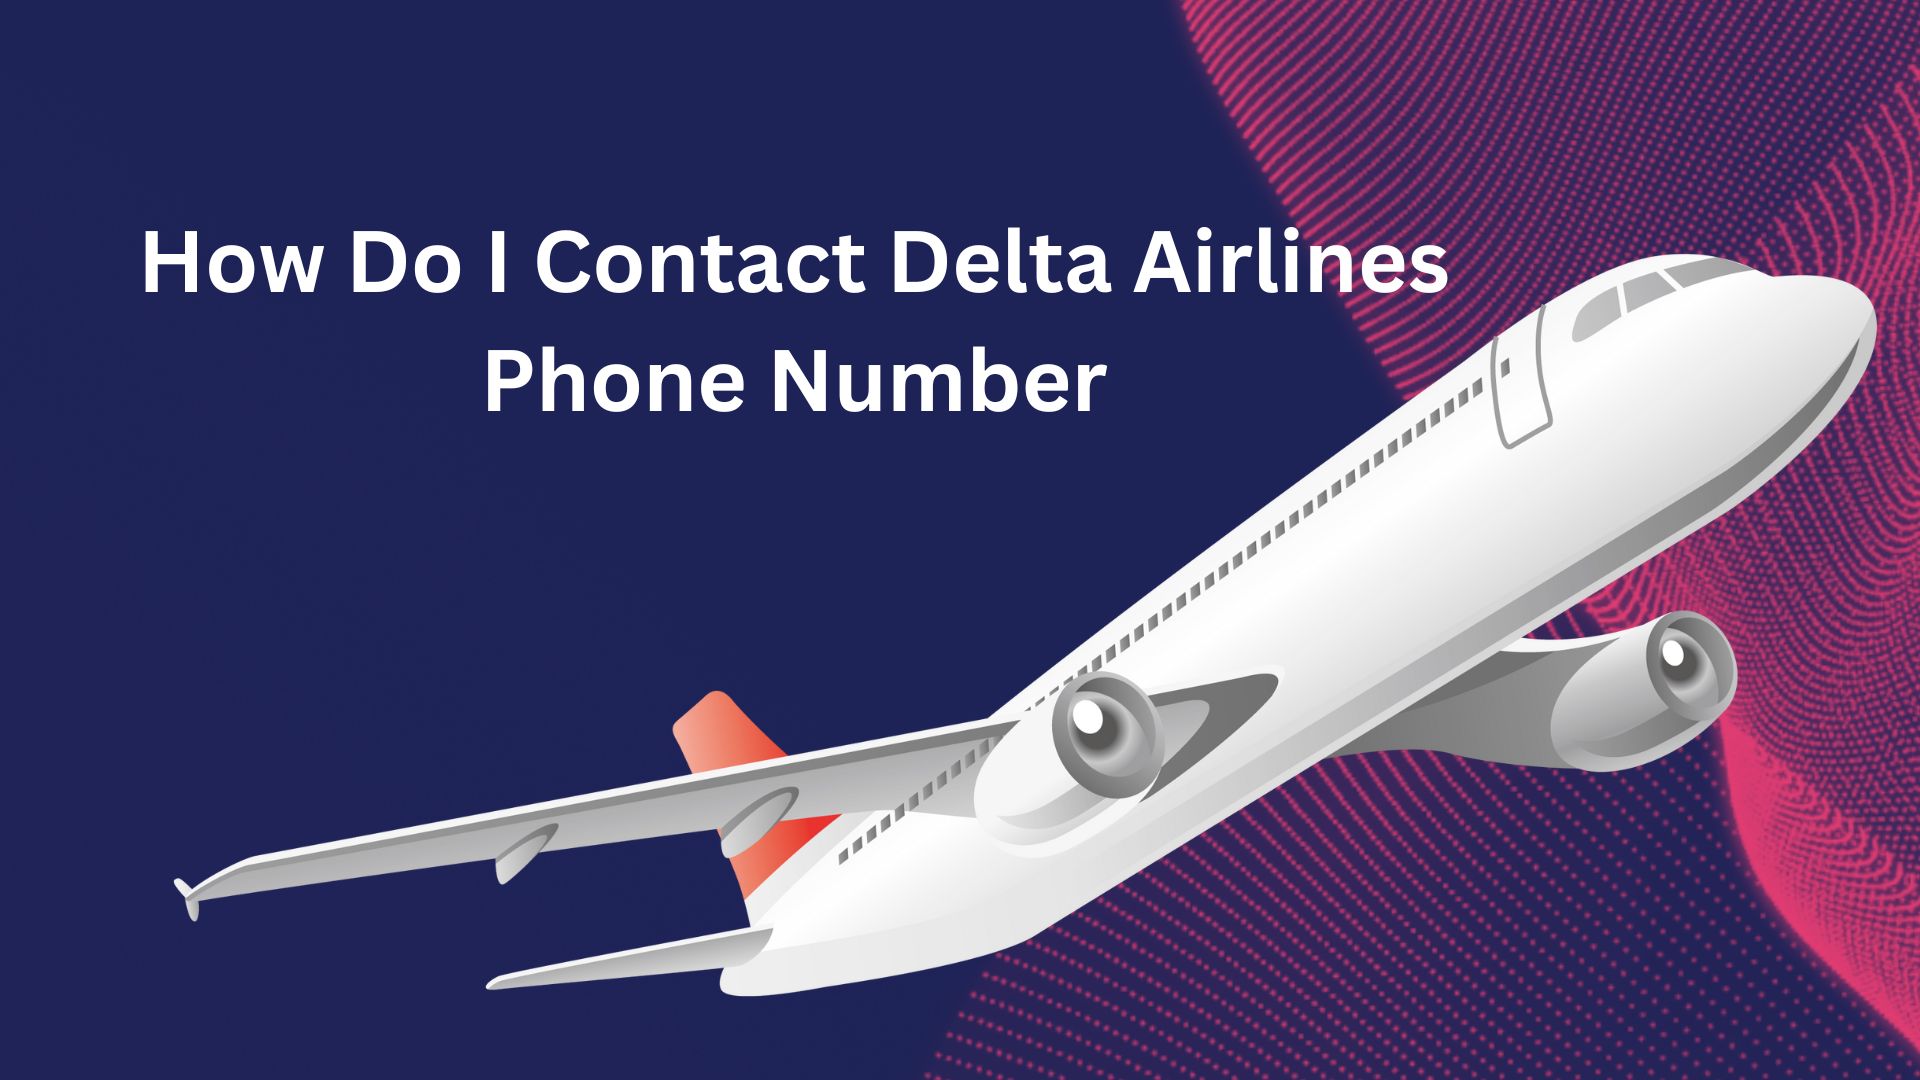 How Do I Contact Delta Airlines Phone Number